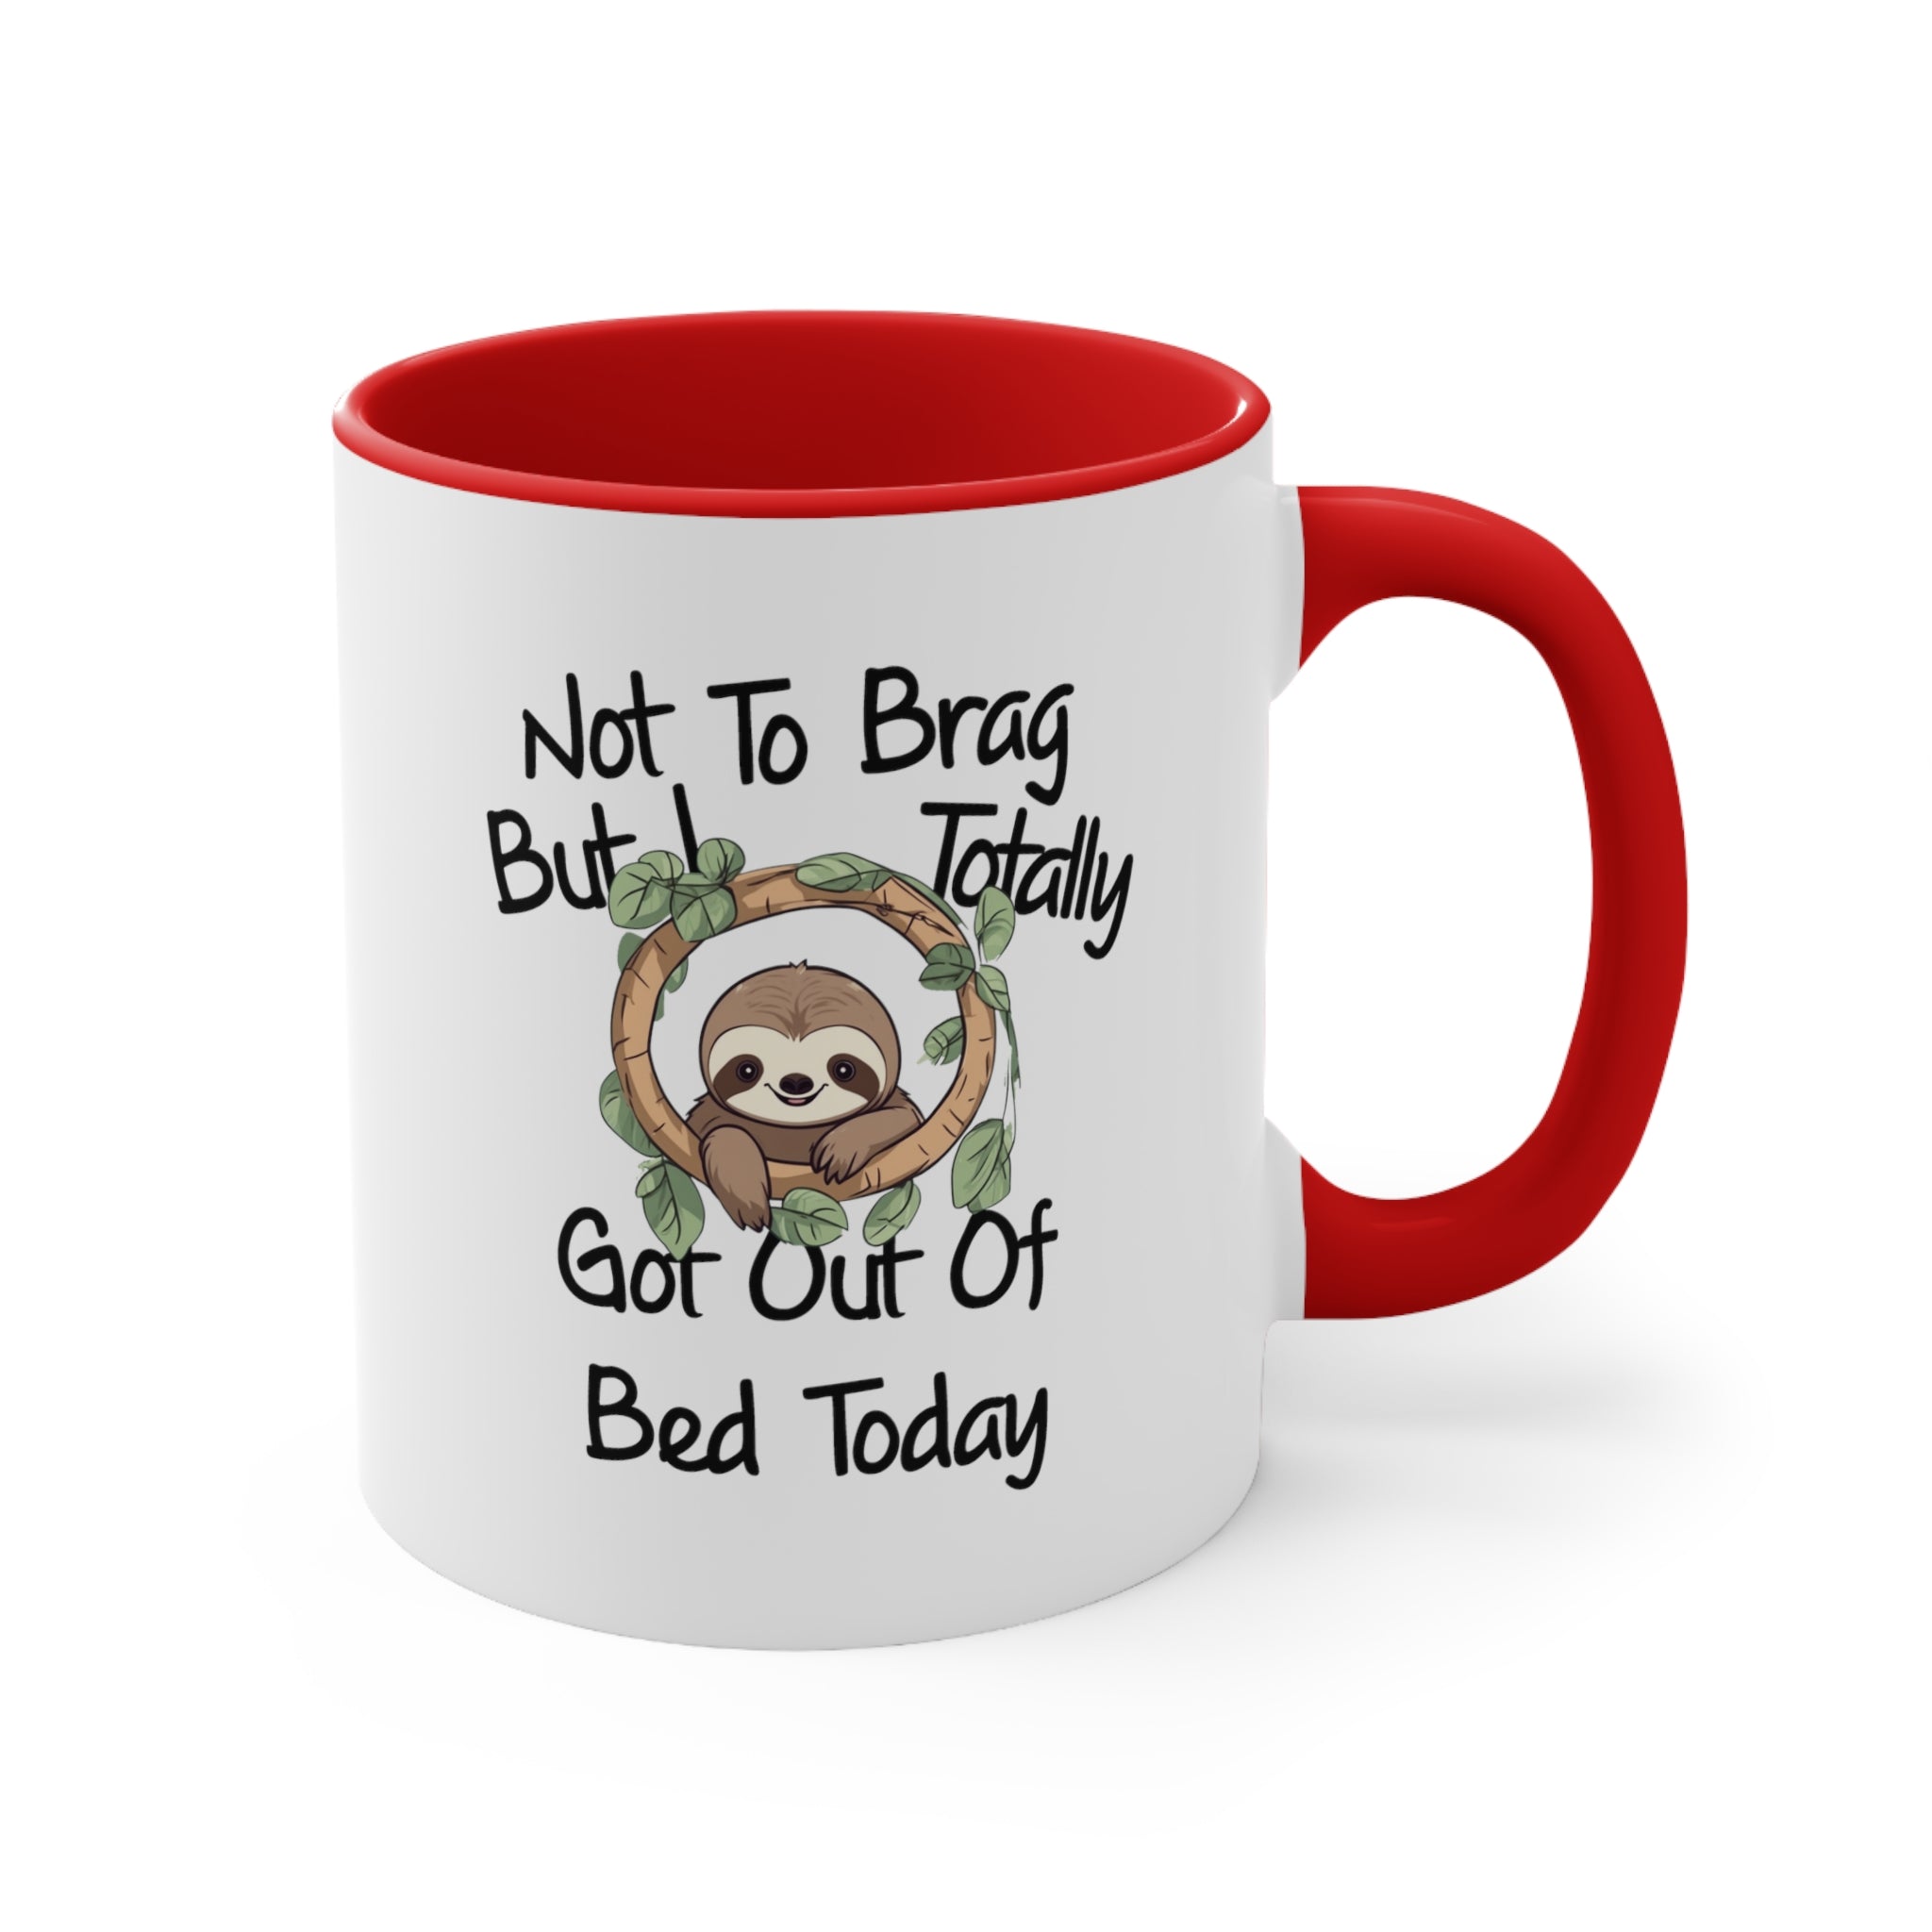 Funny Sloth Coffee Mug, 11oz Not To Brag But I Totally Got Out Of Bed Sloths Humor Humour Joke Comedy Cup